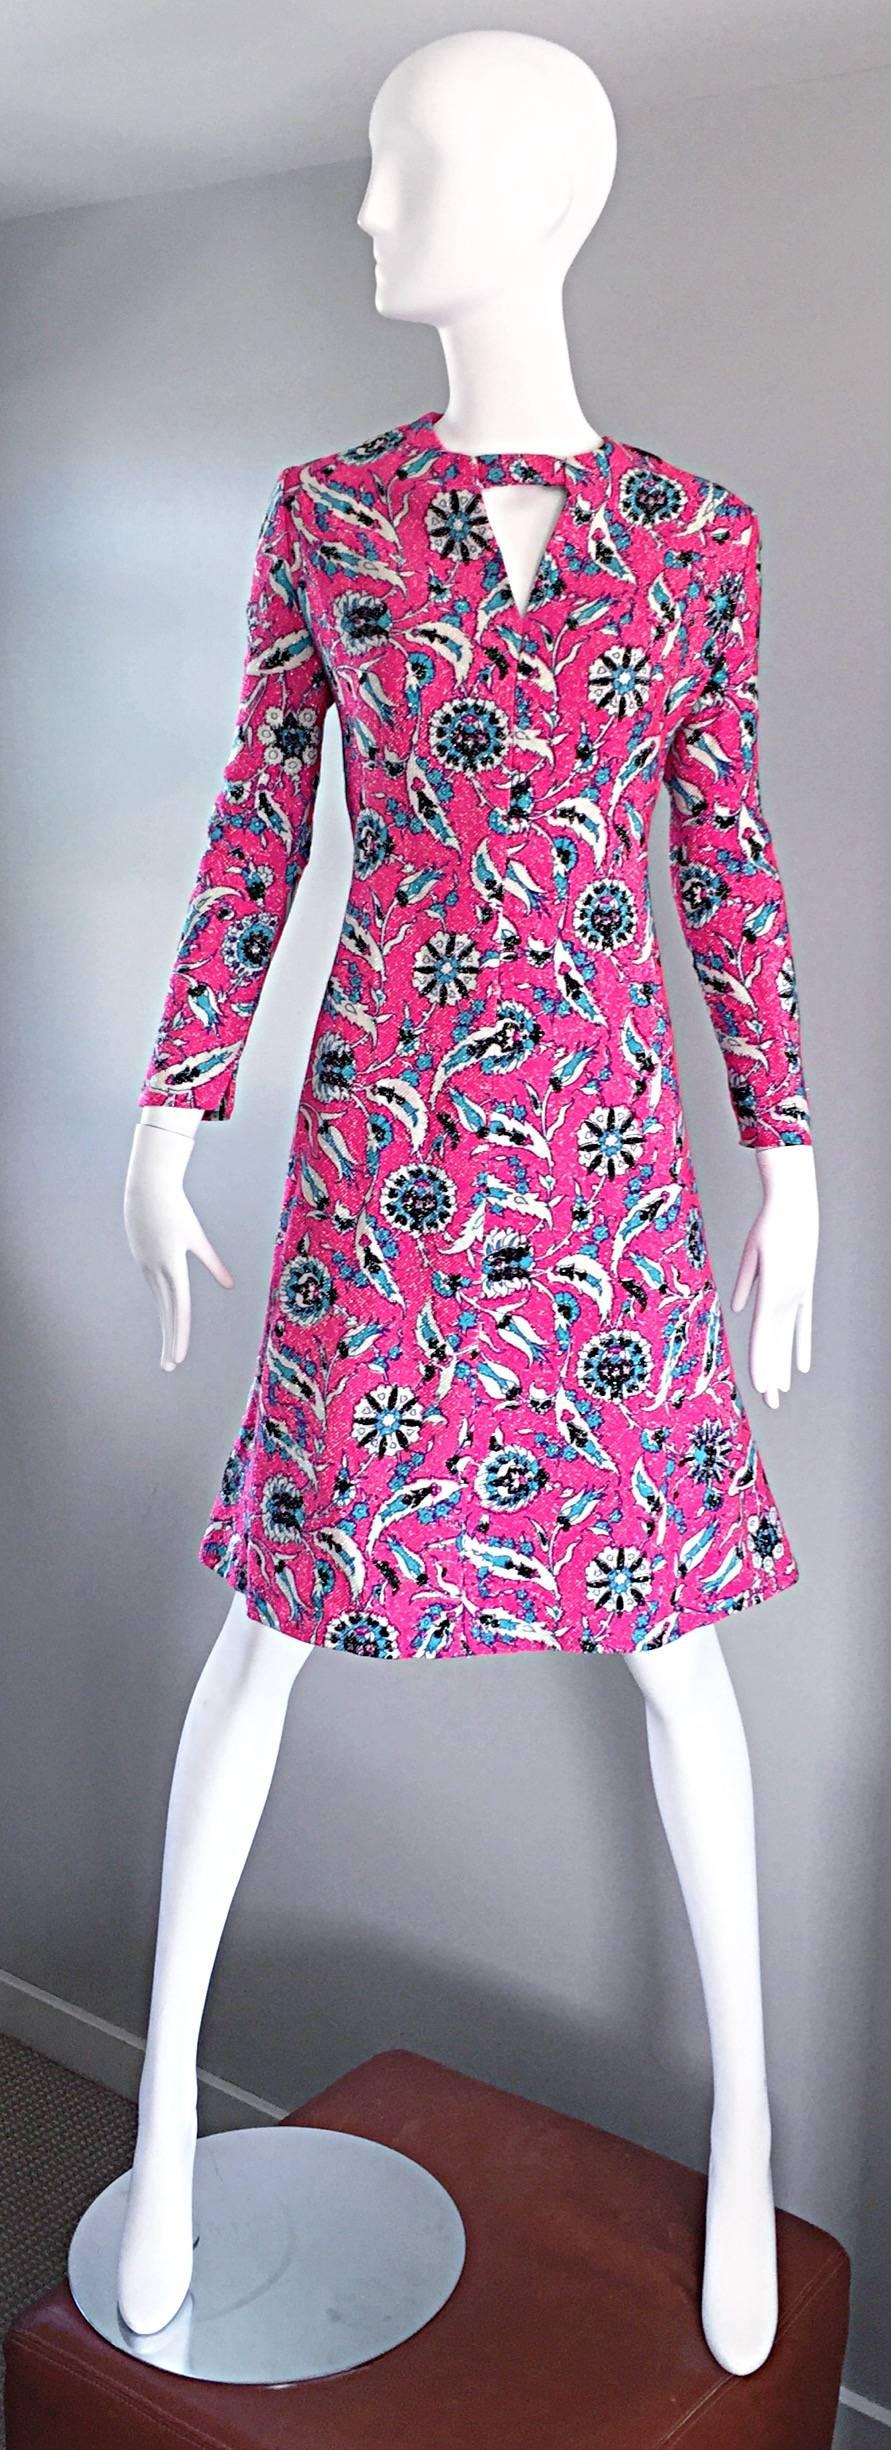 Beautiful vintage 60s ADELE SIMPSON for I. MAGNIN hot pink fuchsia, blue, silver and black lurex knit metallic dress! Perfect A-Line fit that is so chic and flattering. Cut-out above bust adds reveals just the right amount of skin. Long sleeves make